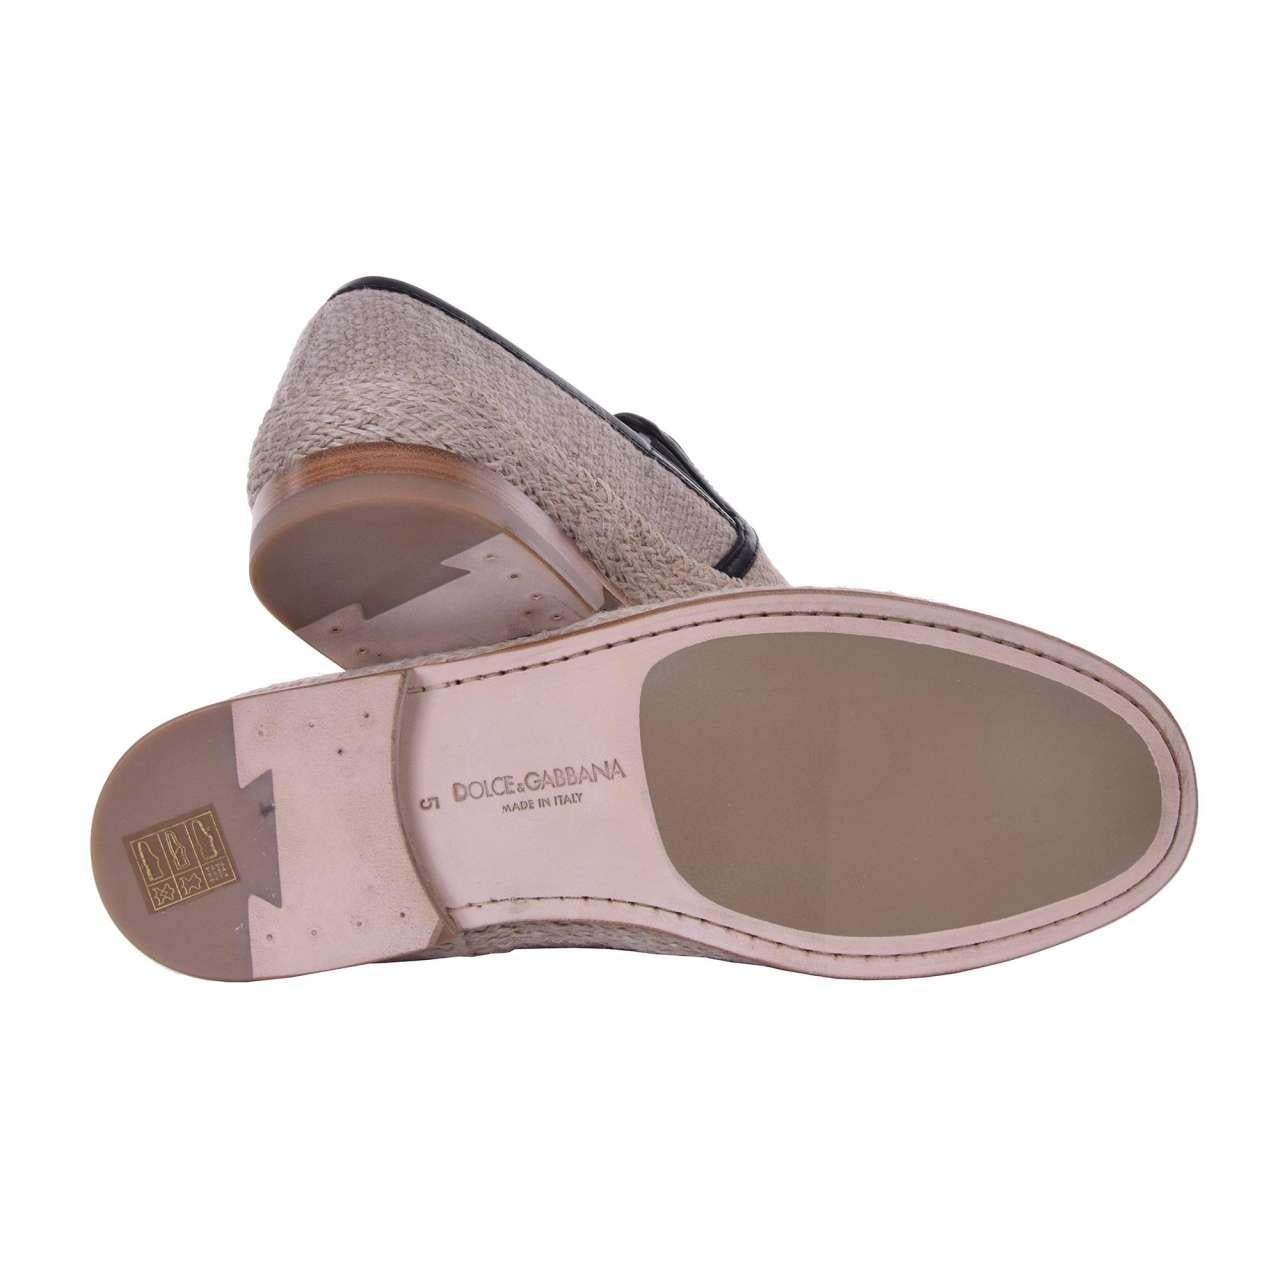 - Linen canvas Espadrilles PIANOSA Pantofola with leather details by DOLCE & GABBANA Black Label - New with Box - MADE IN ITALY - Former RRP: EUR 475 - Model: A50014-AR650-89651 - Material: 71% Linen, 29% Calf leather - Sole: Rubber / Leather -